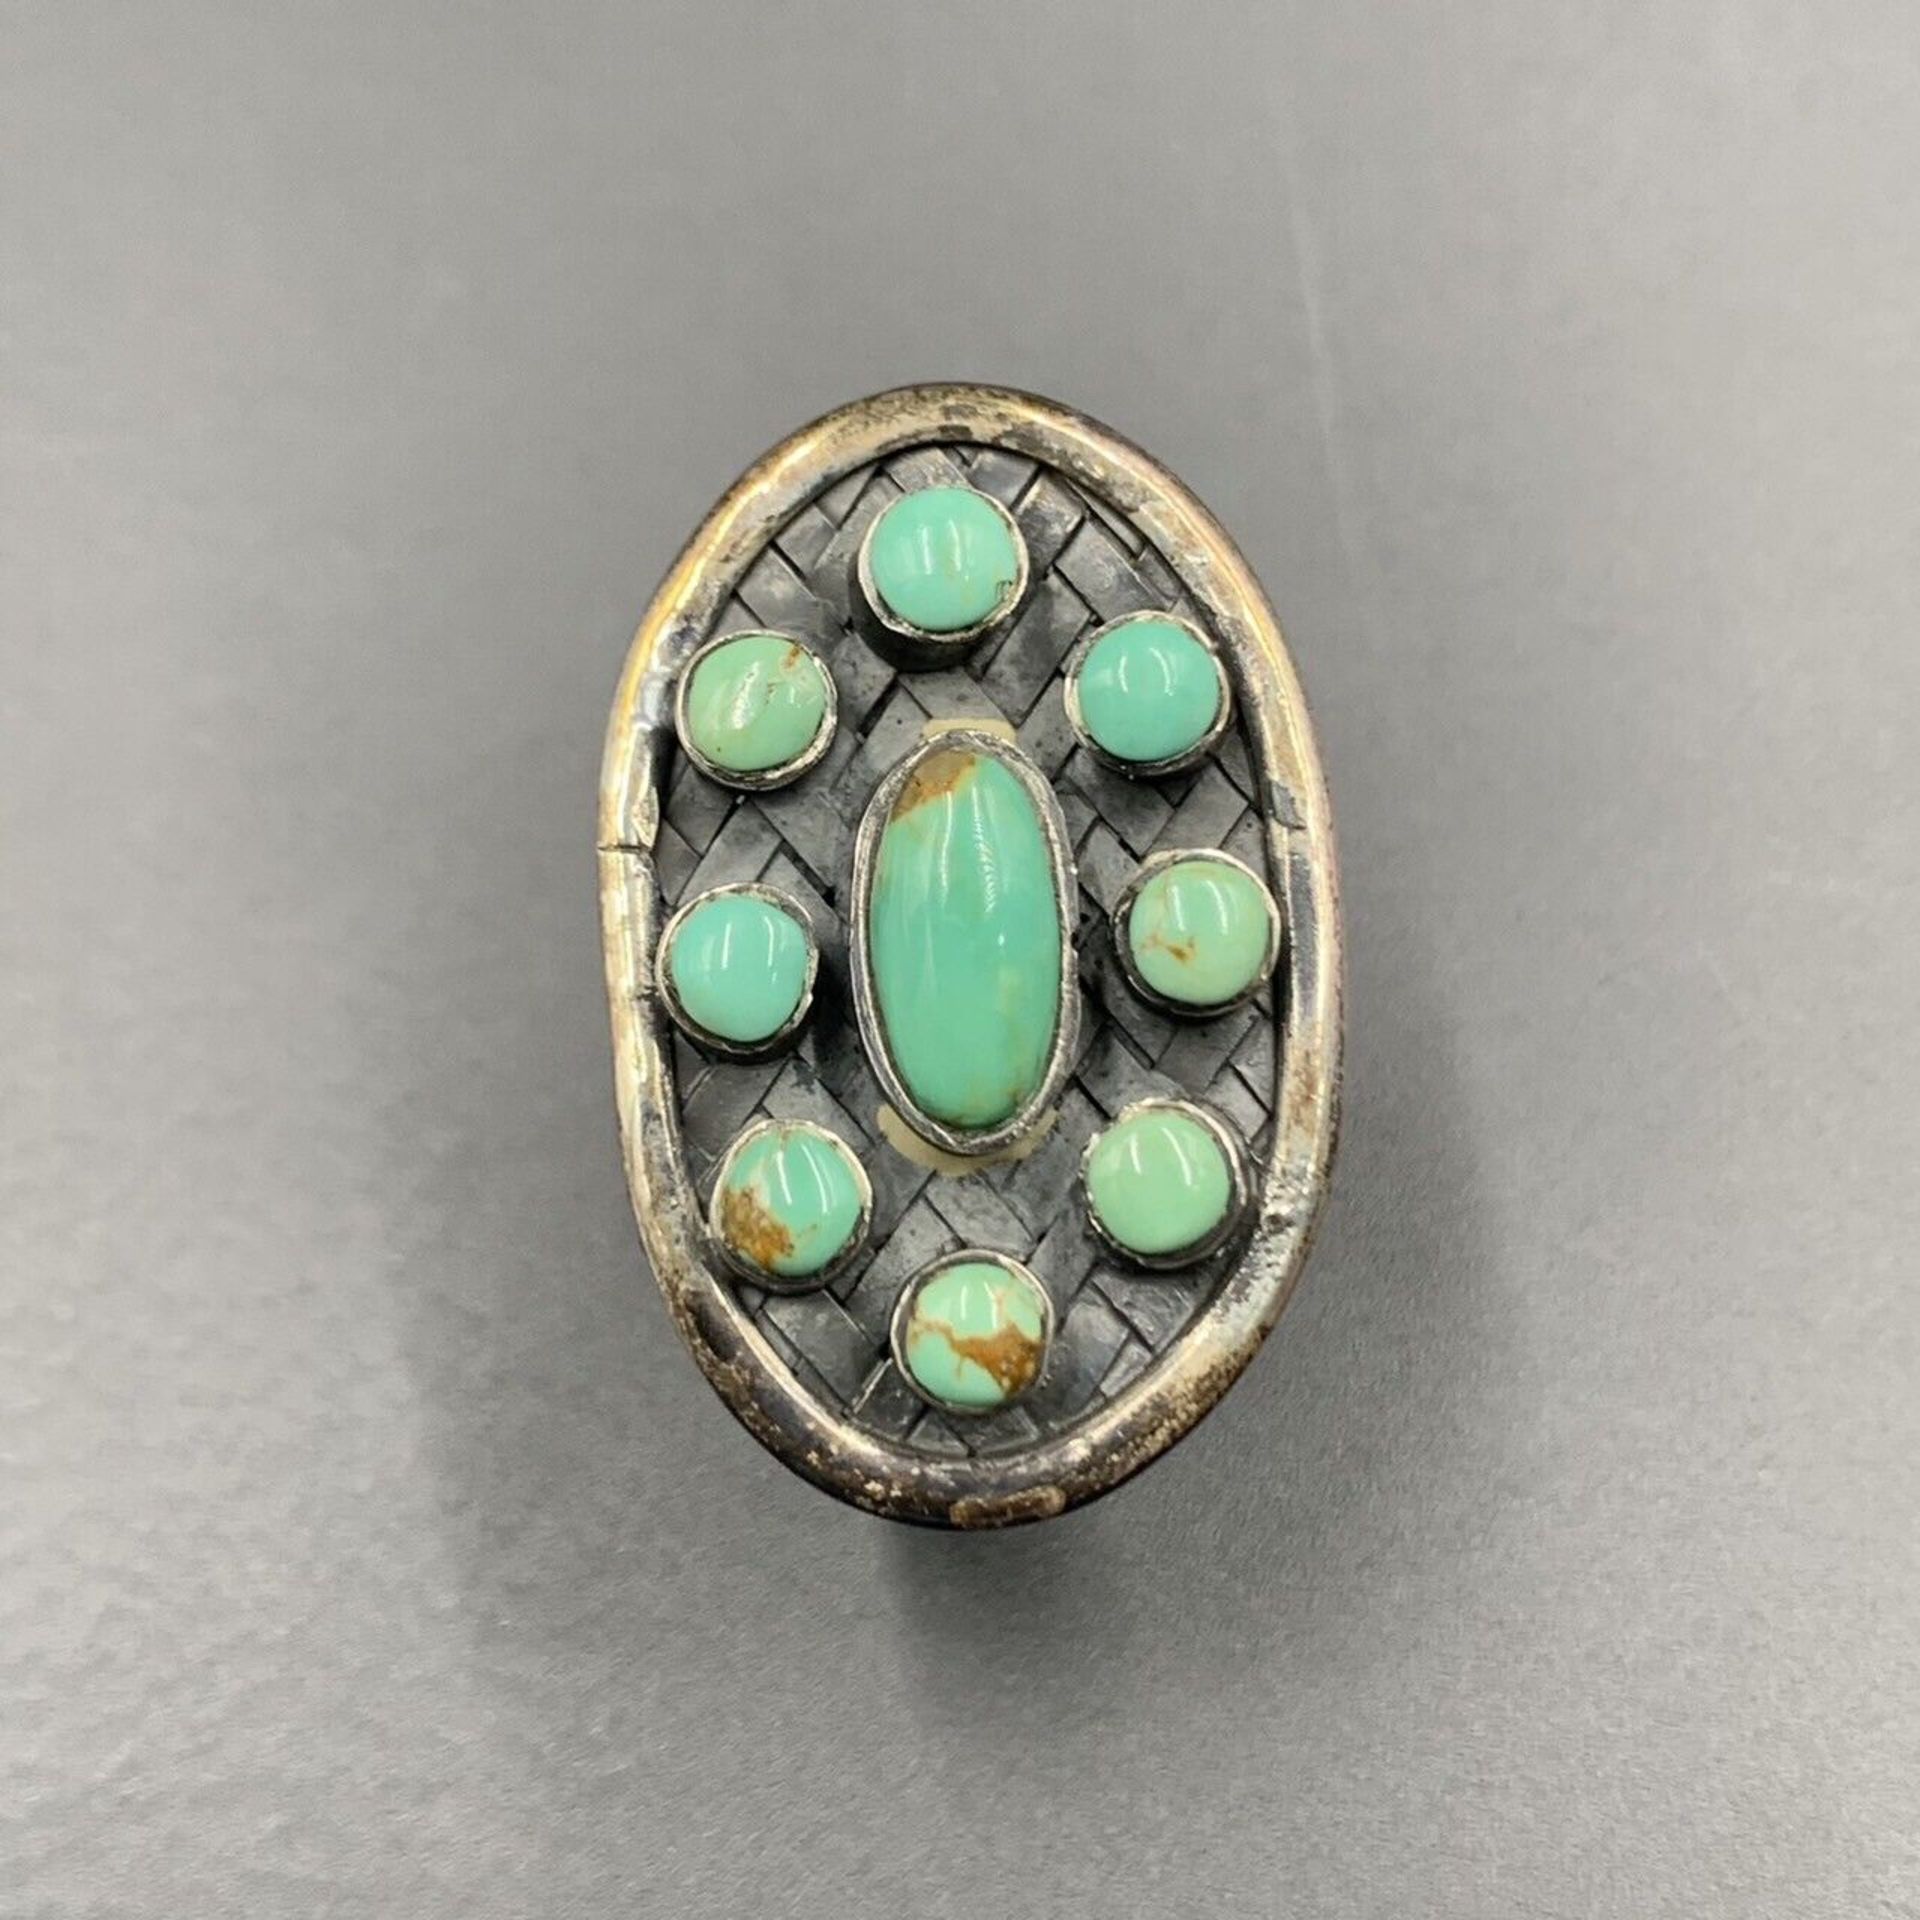 Handmade Natural Thai Made Turquoise With Silver Ring, Native American Inspired Ring. - Image 5 of 5